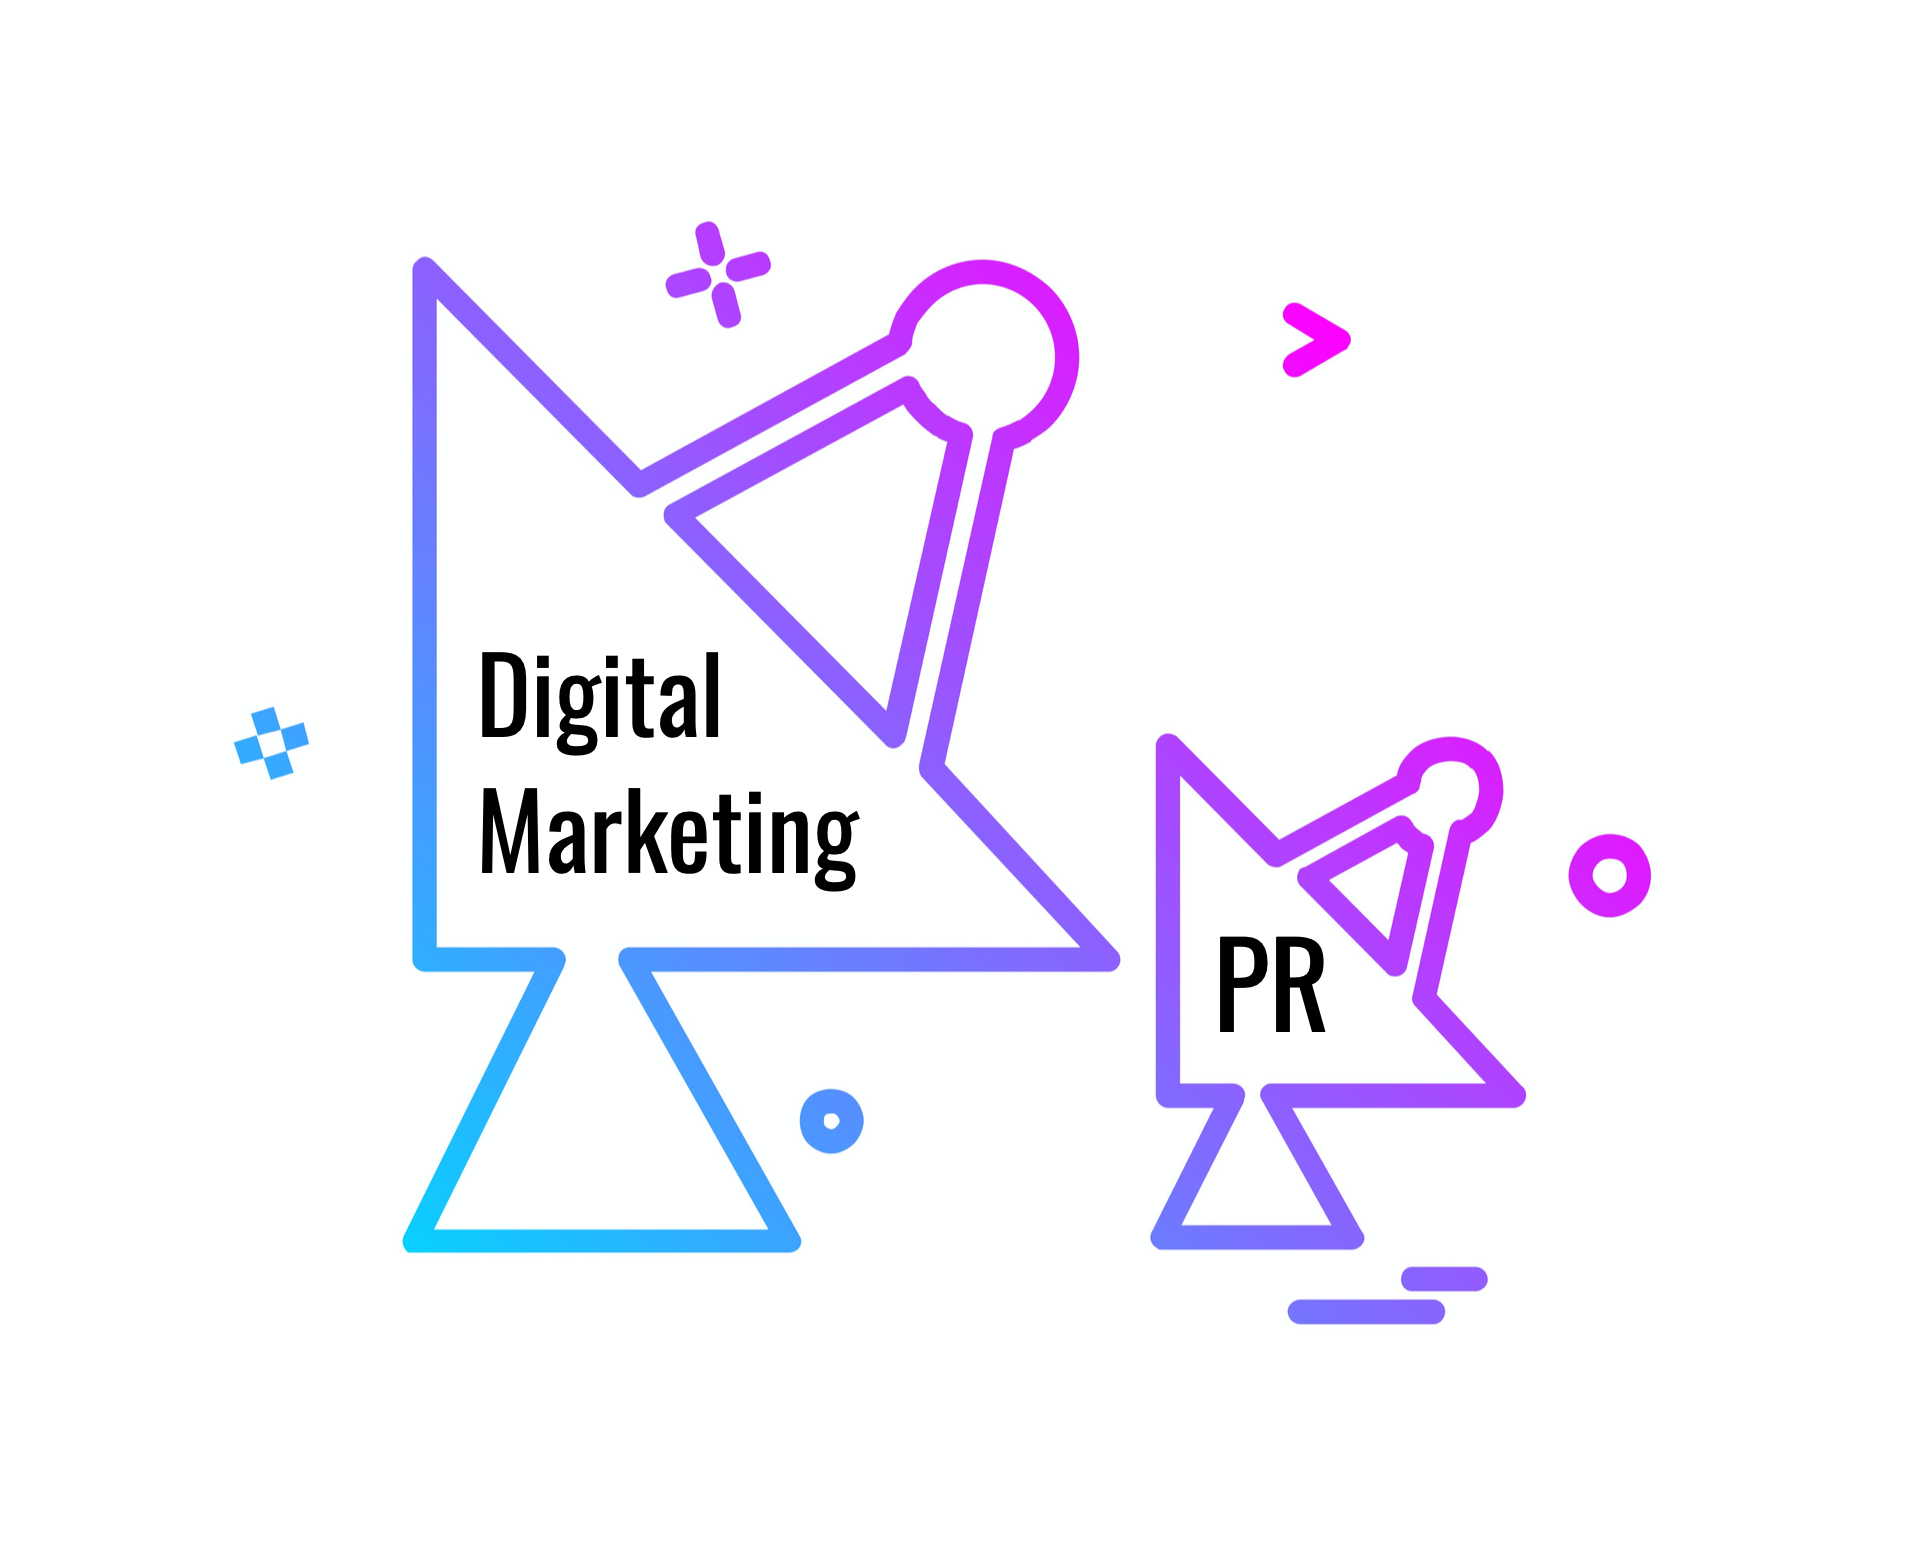 What is better - PR or Digital Marketing?